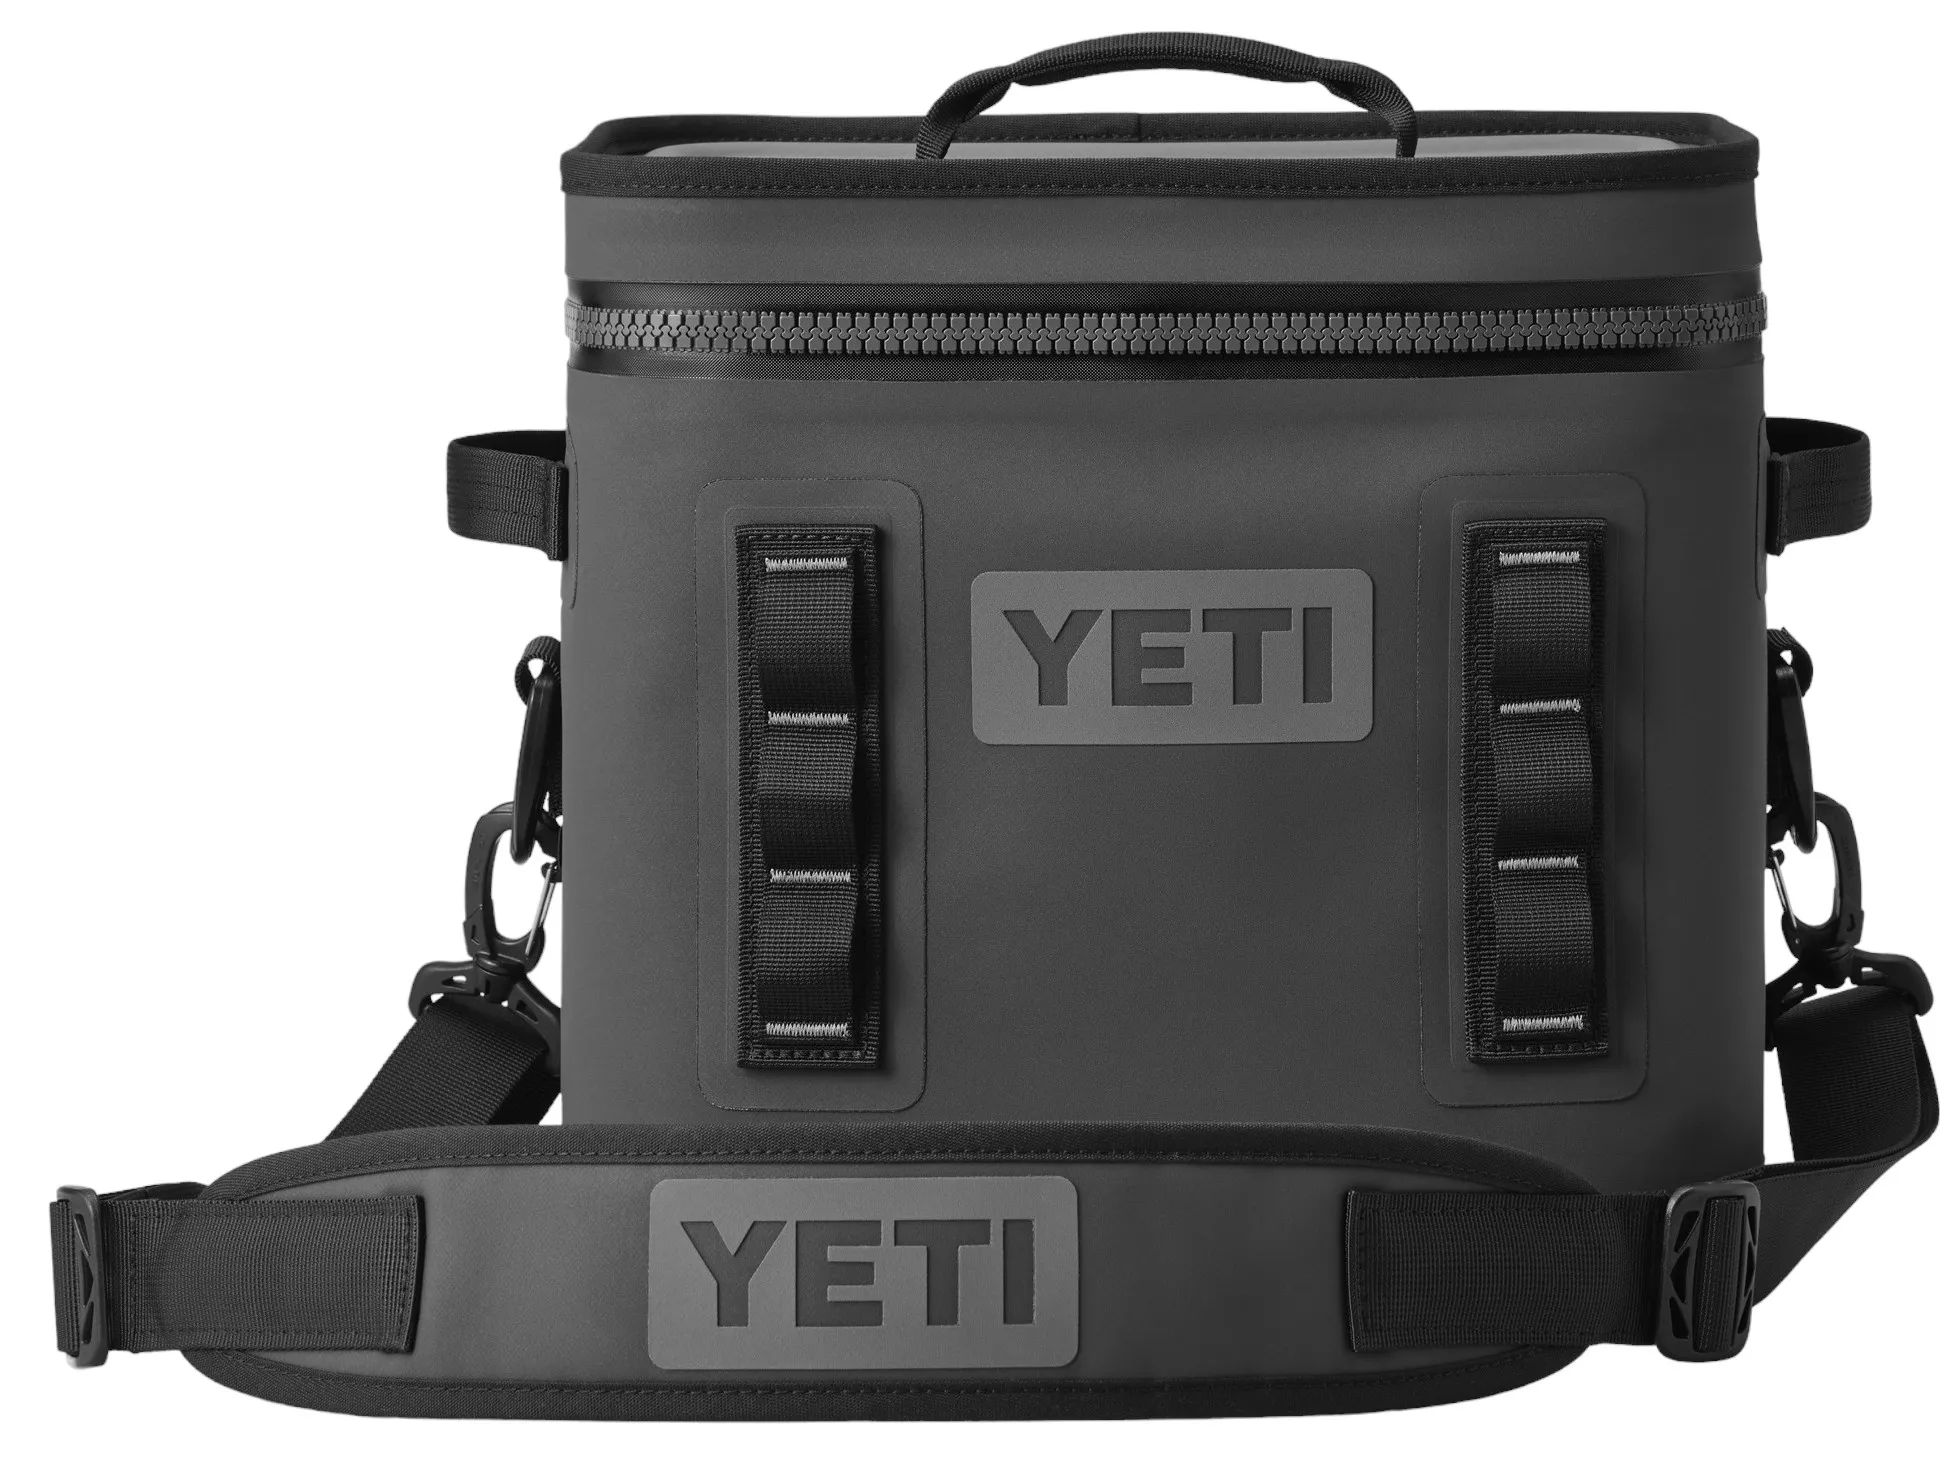 YETI Hopper Flip 12 Cooler with Top Handle, Charcoal | Dick's Sporting Goods